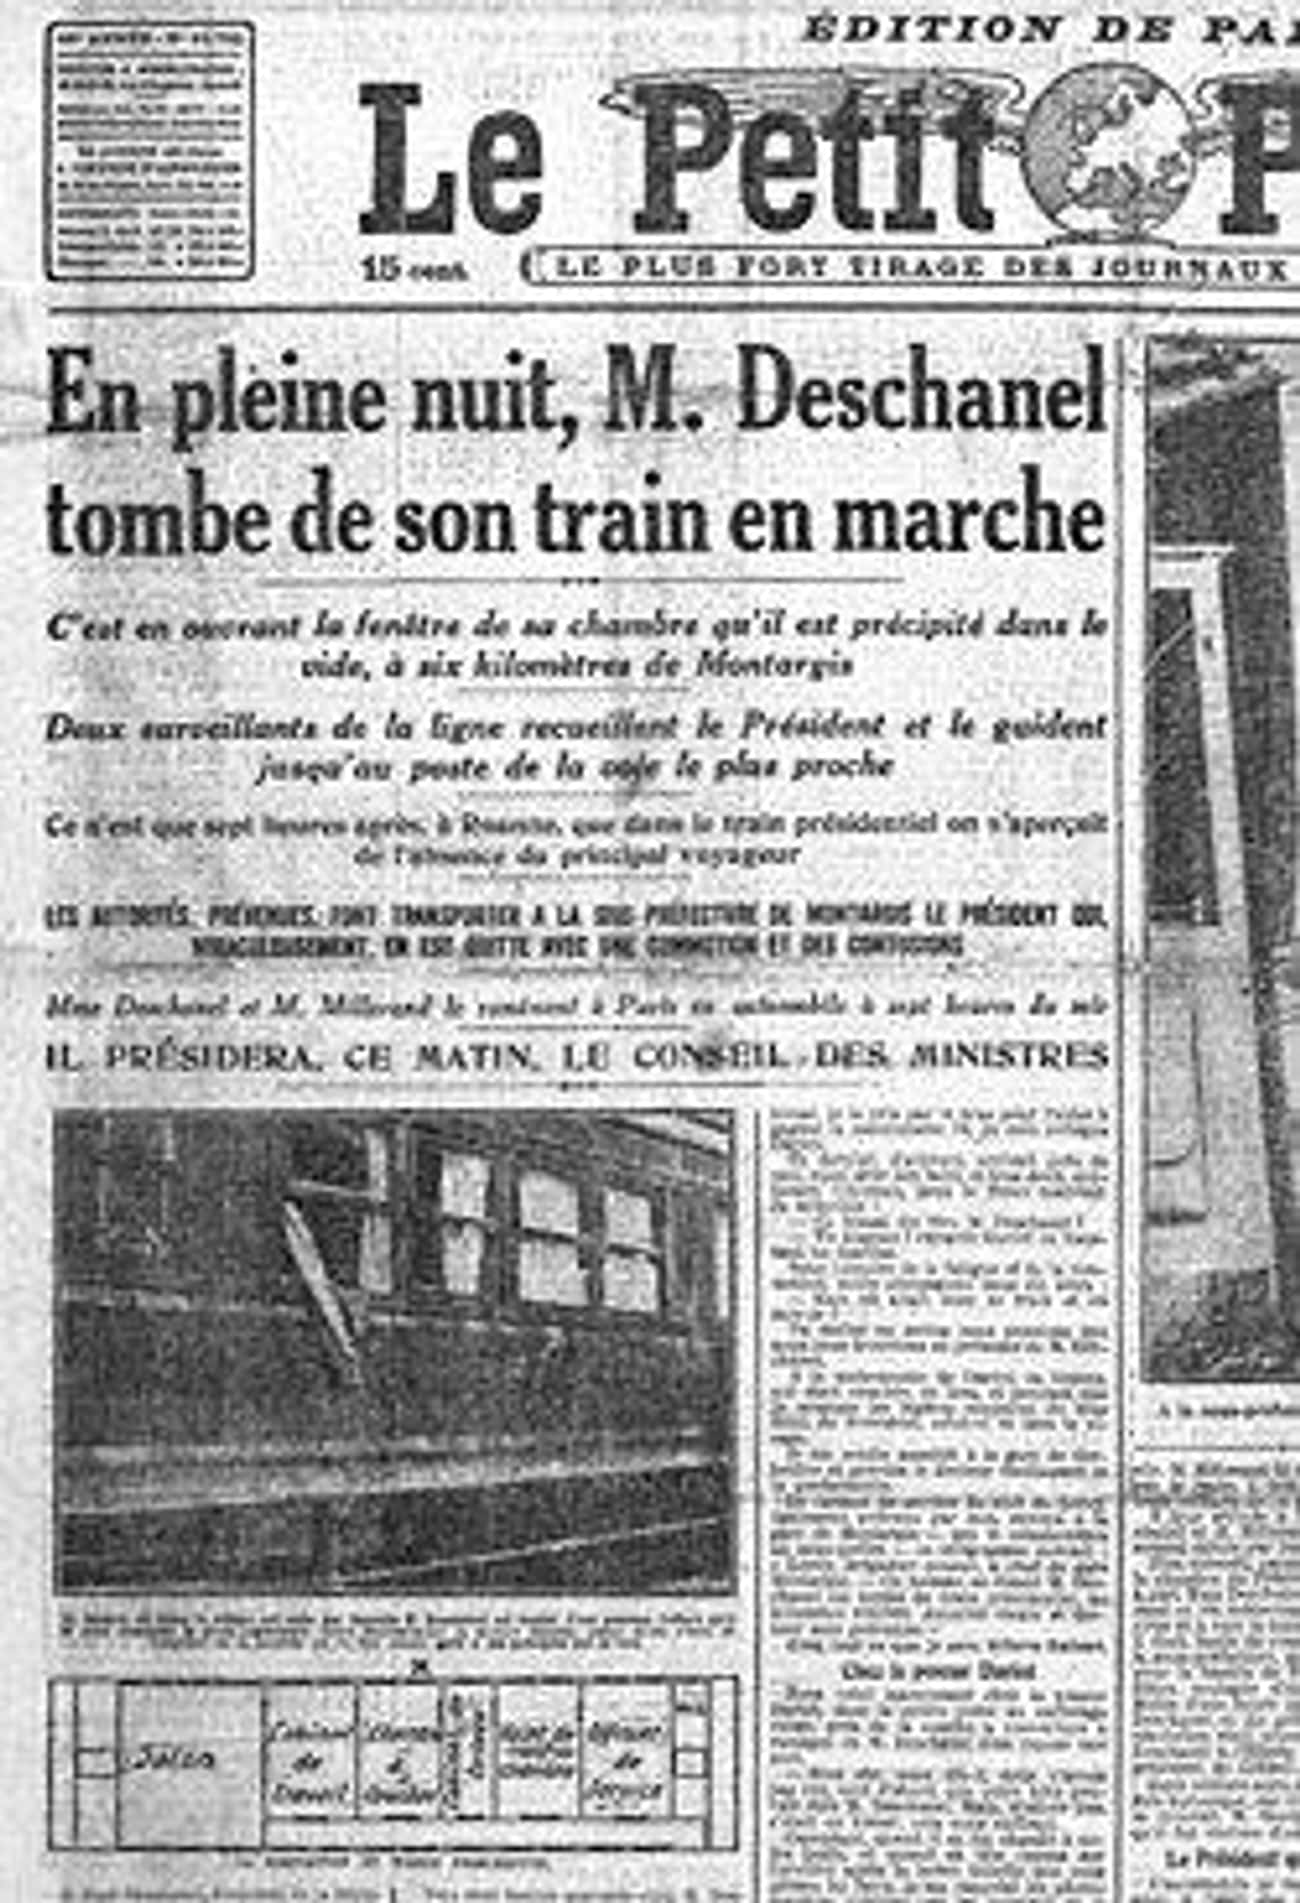 The President Of France Fell Out The Window Of A Moving Train